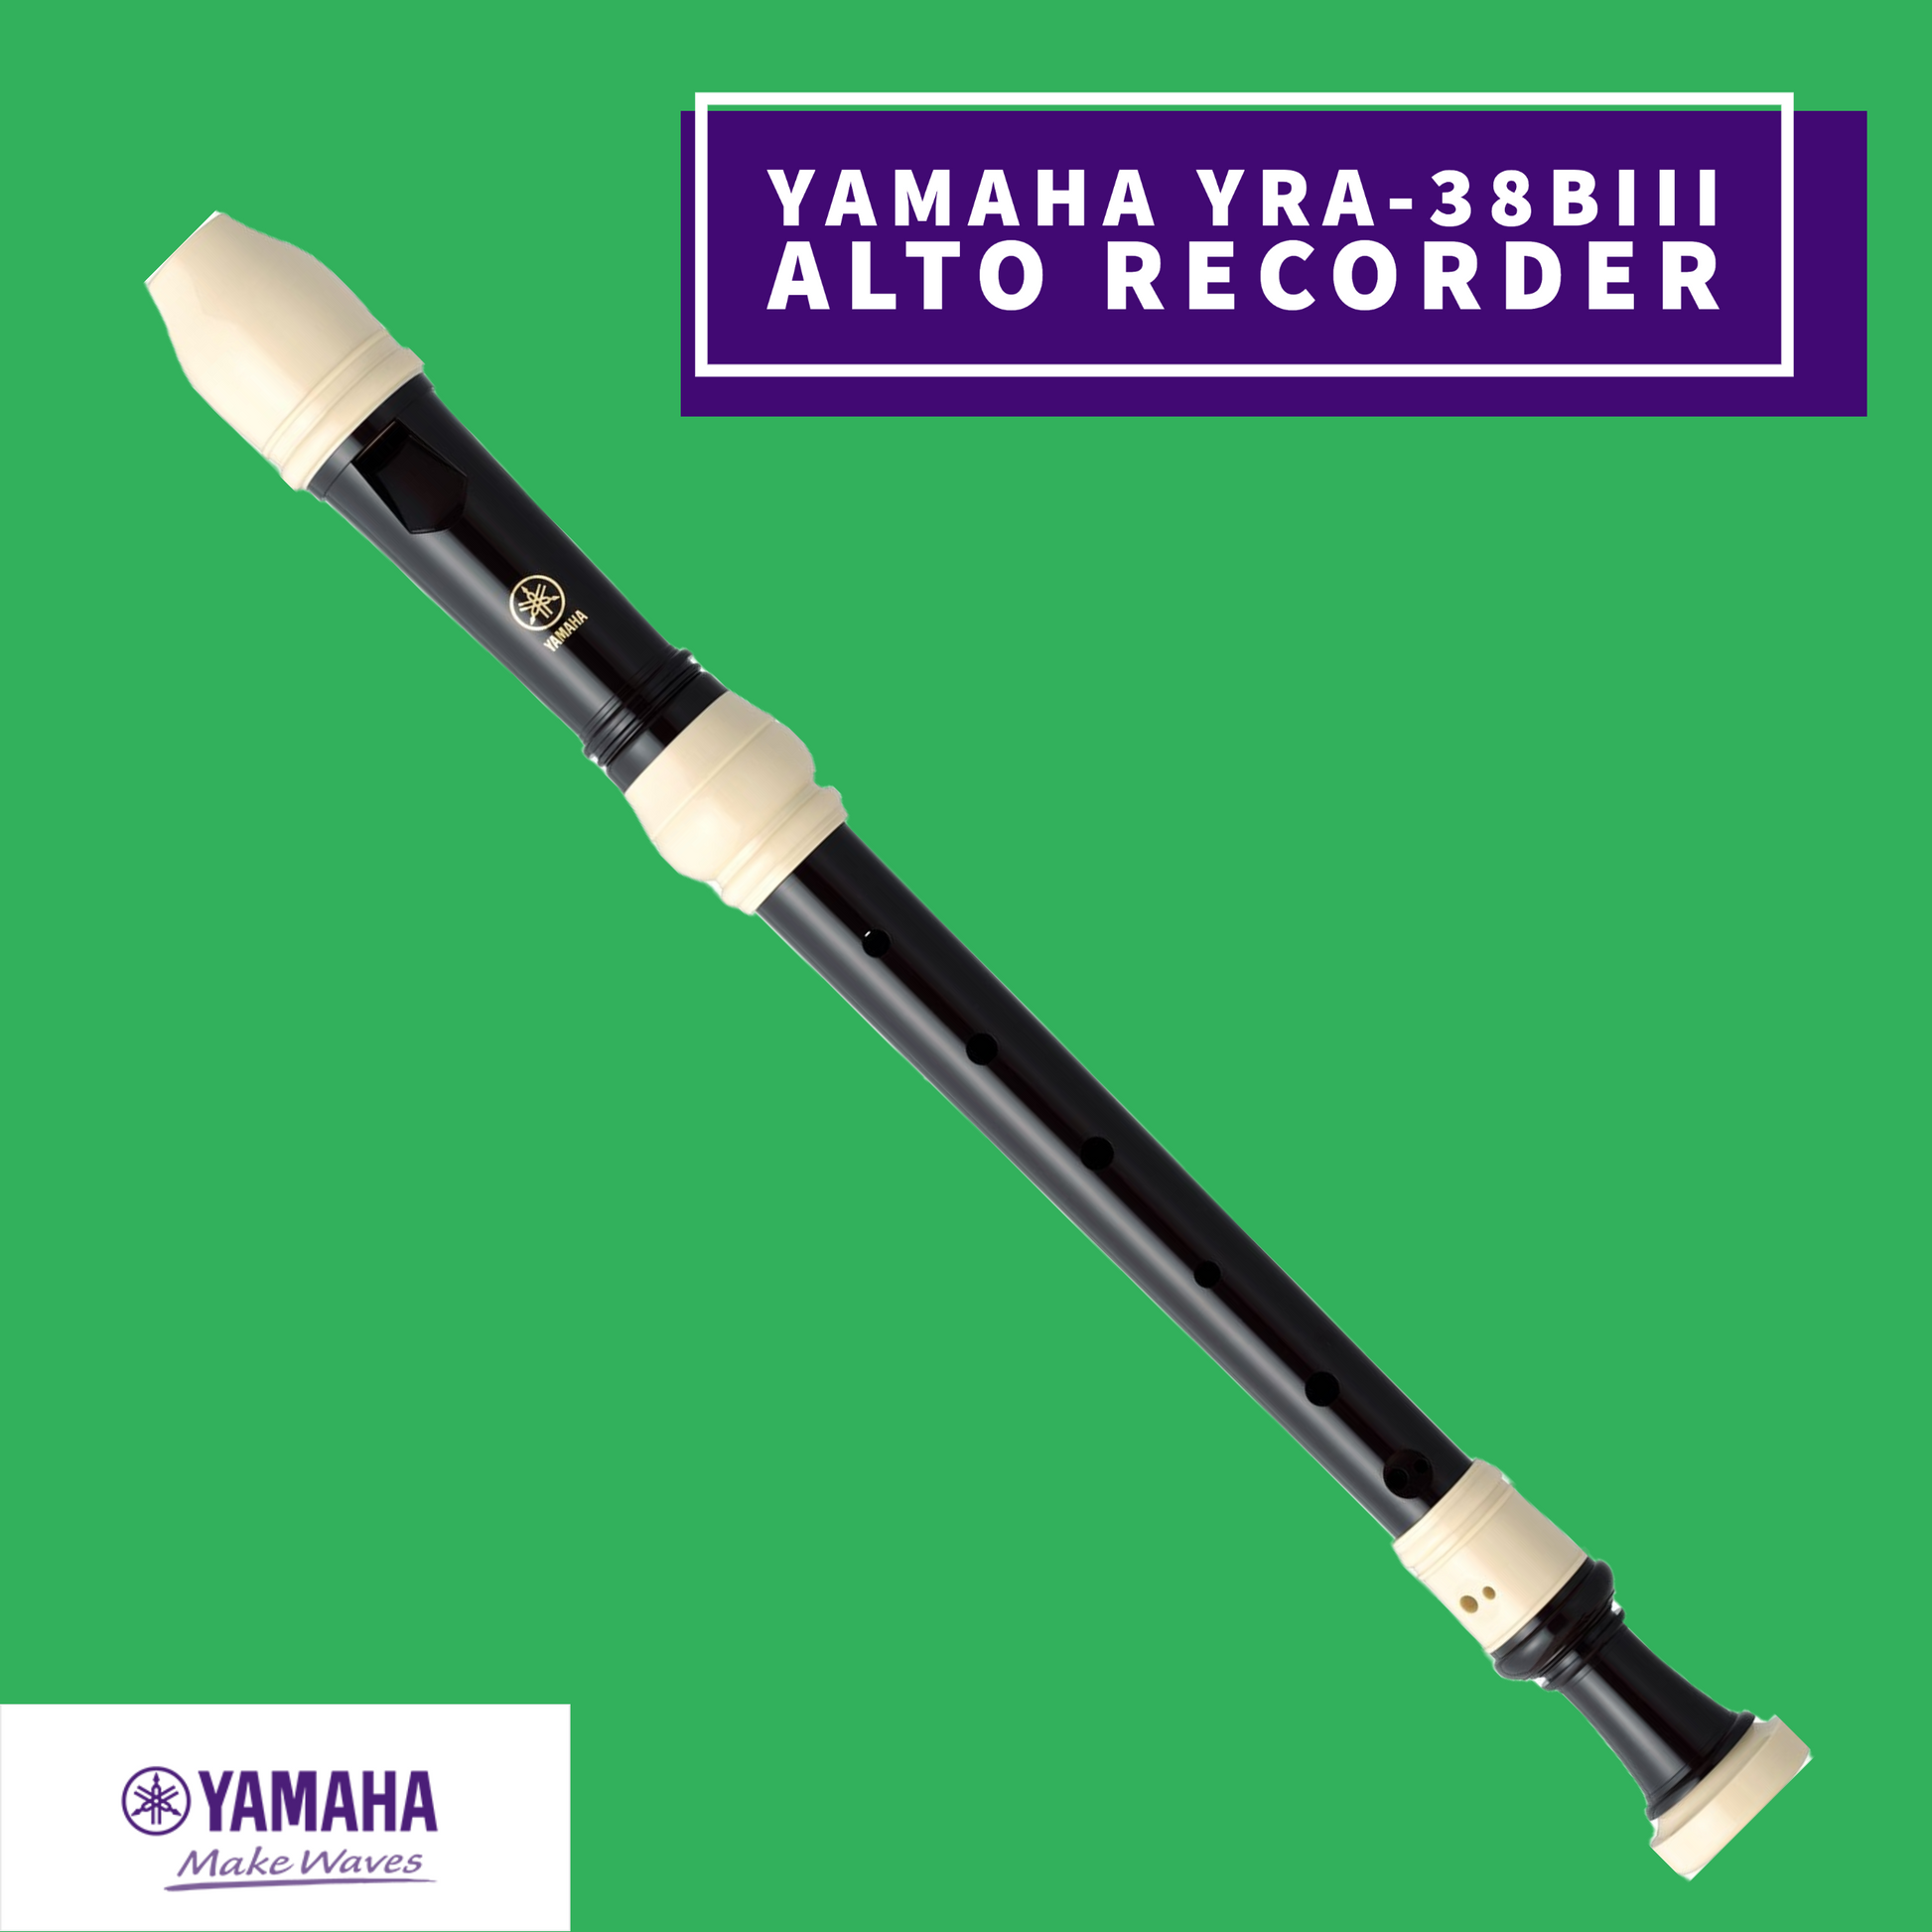 Yamaha Yra-38Biii Alto 3 Piece Abs Resin Recorder (Key Of F) Musical Instruments & Accessories